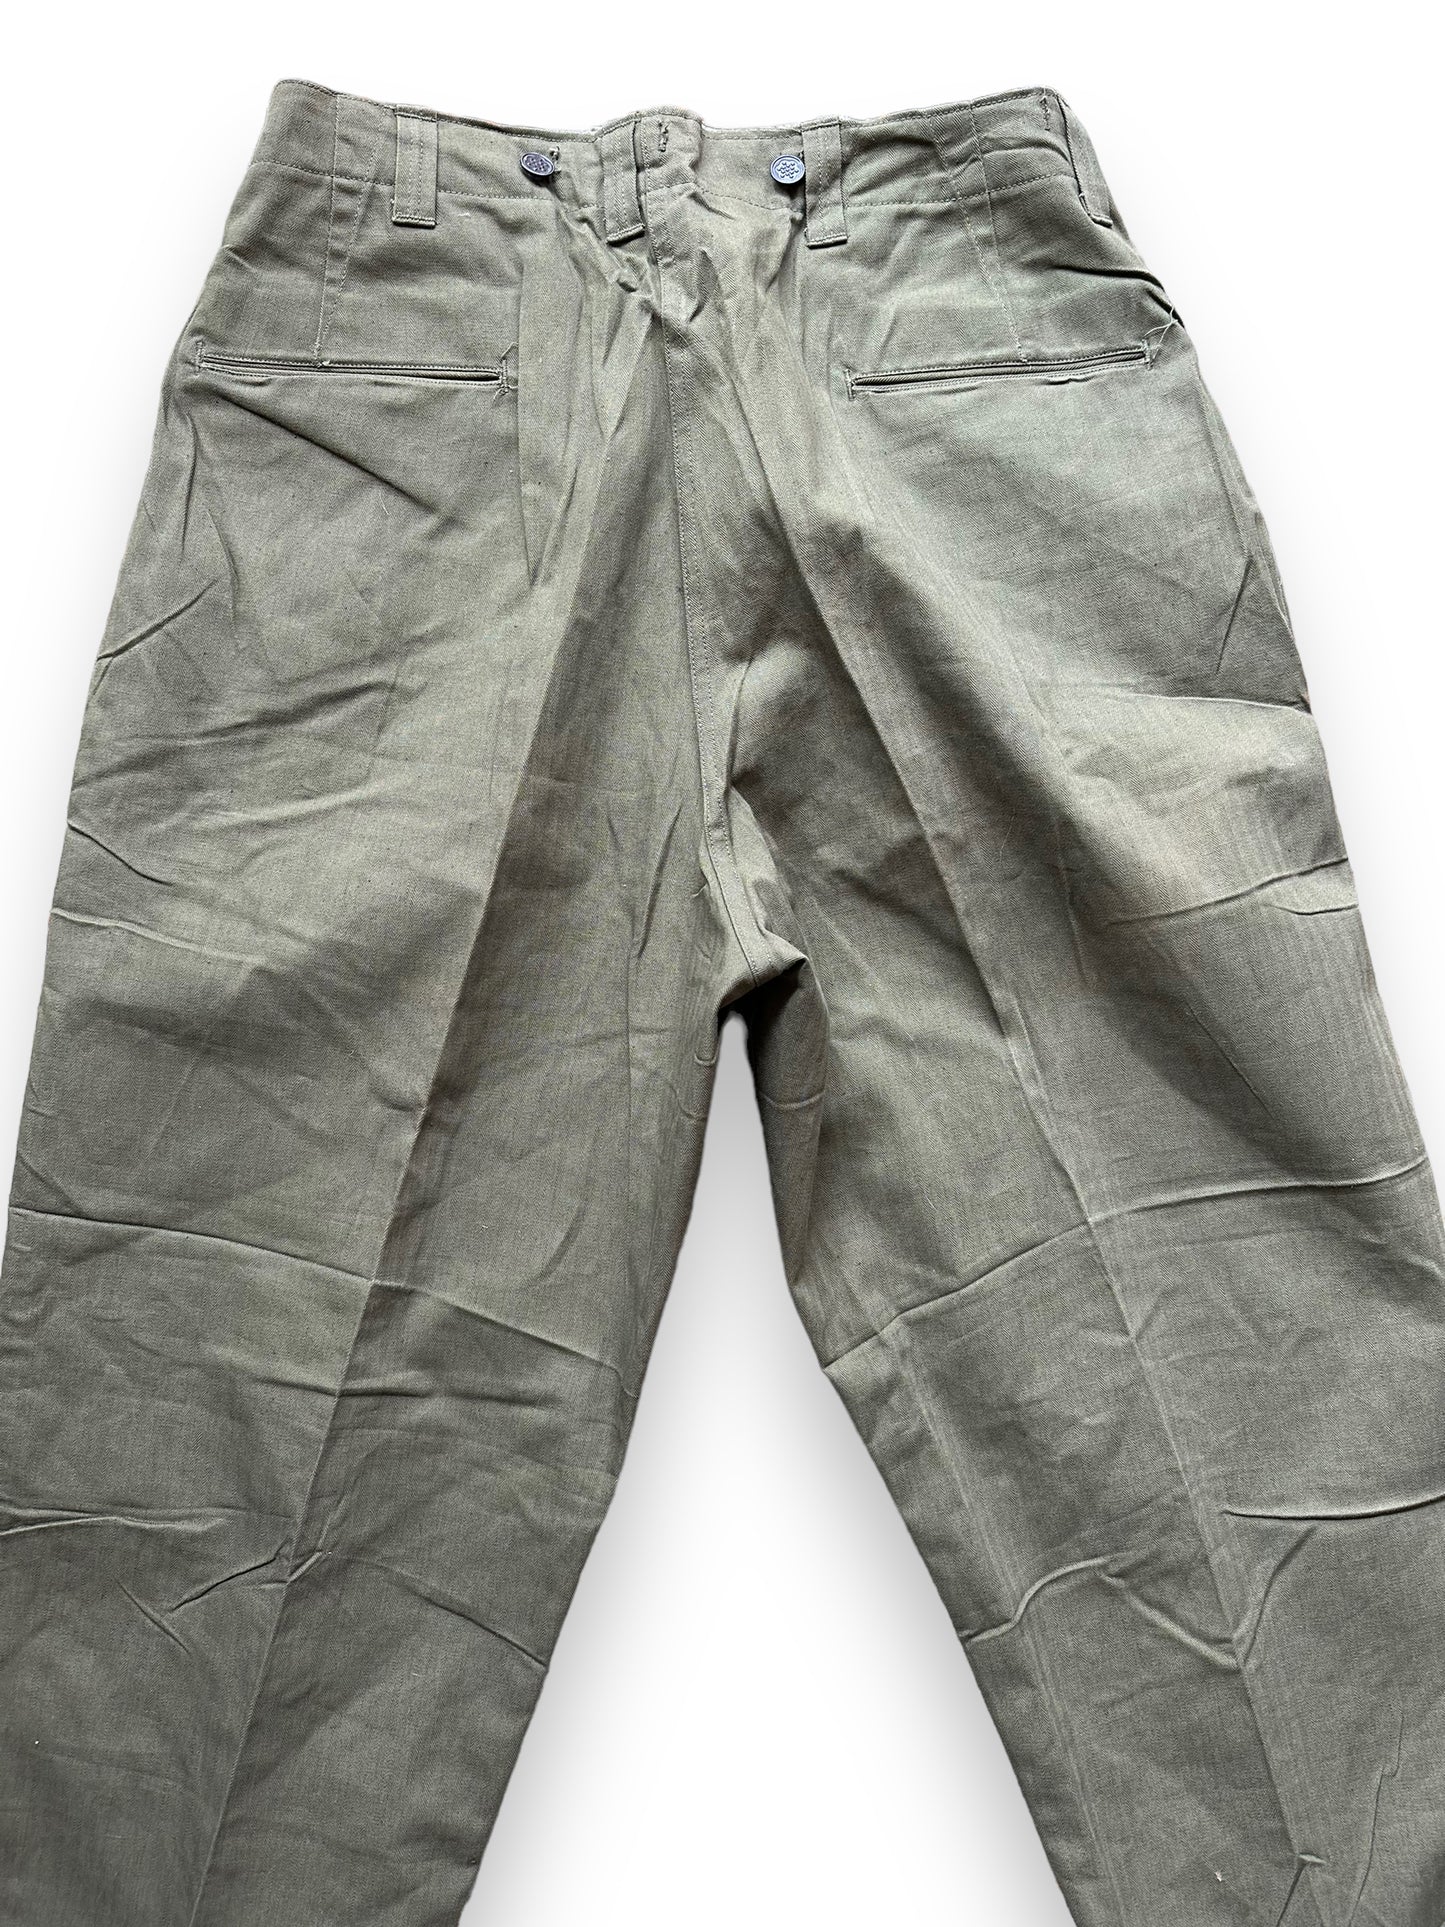 Upper Rear View of Vintage WWII M-43 HBT Field Cotton Trousers Olive Drab W34 | Barn Owl Vintage Seattle | Vintage Military Trousers Seattle